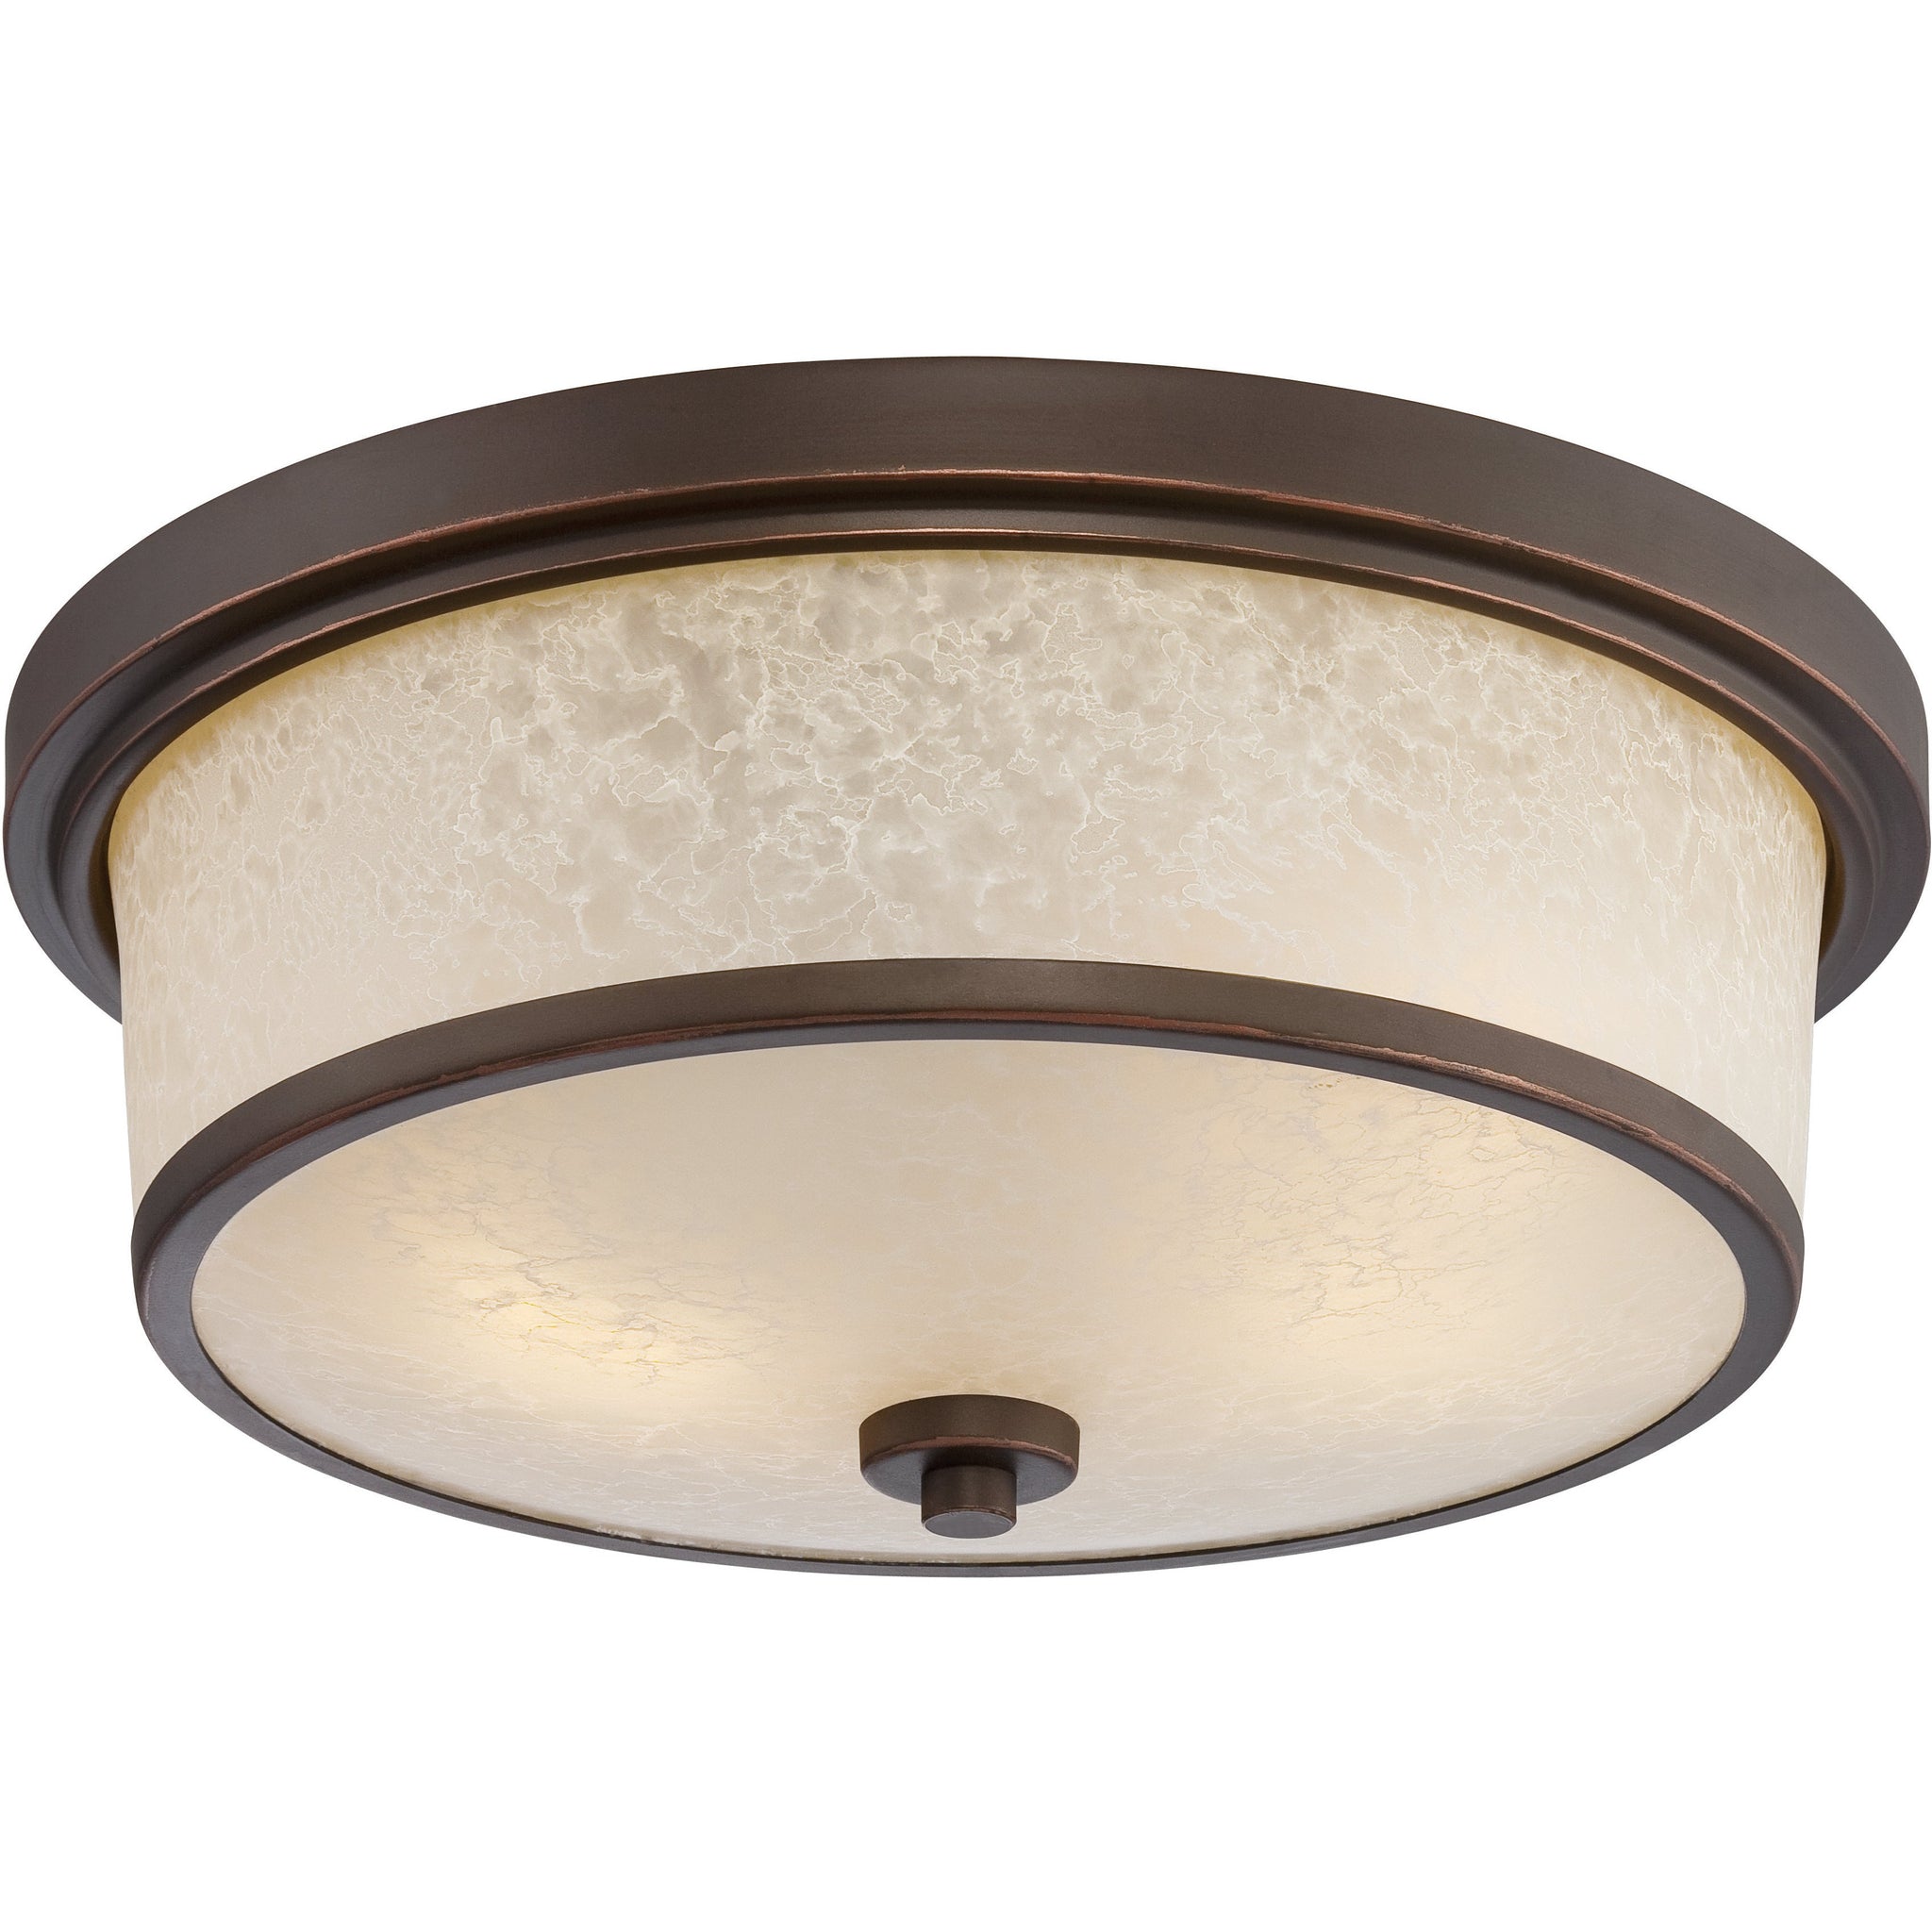 Diego LED Outdoor Ceiling Light